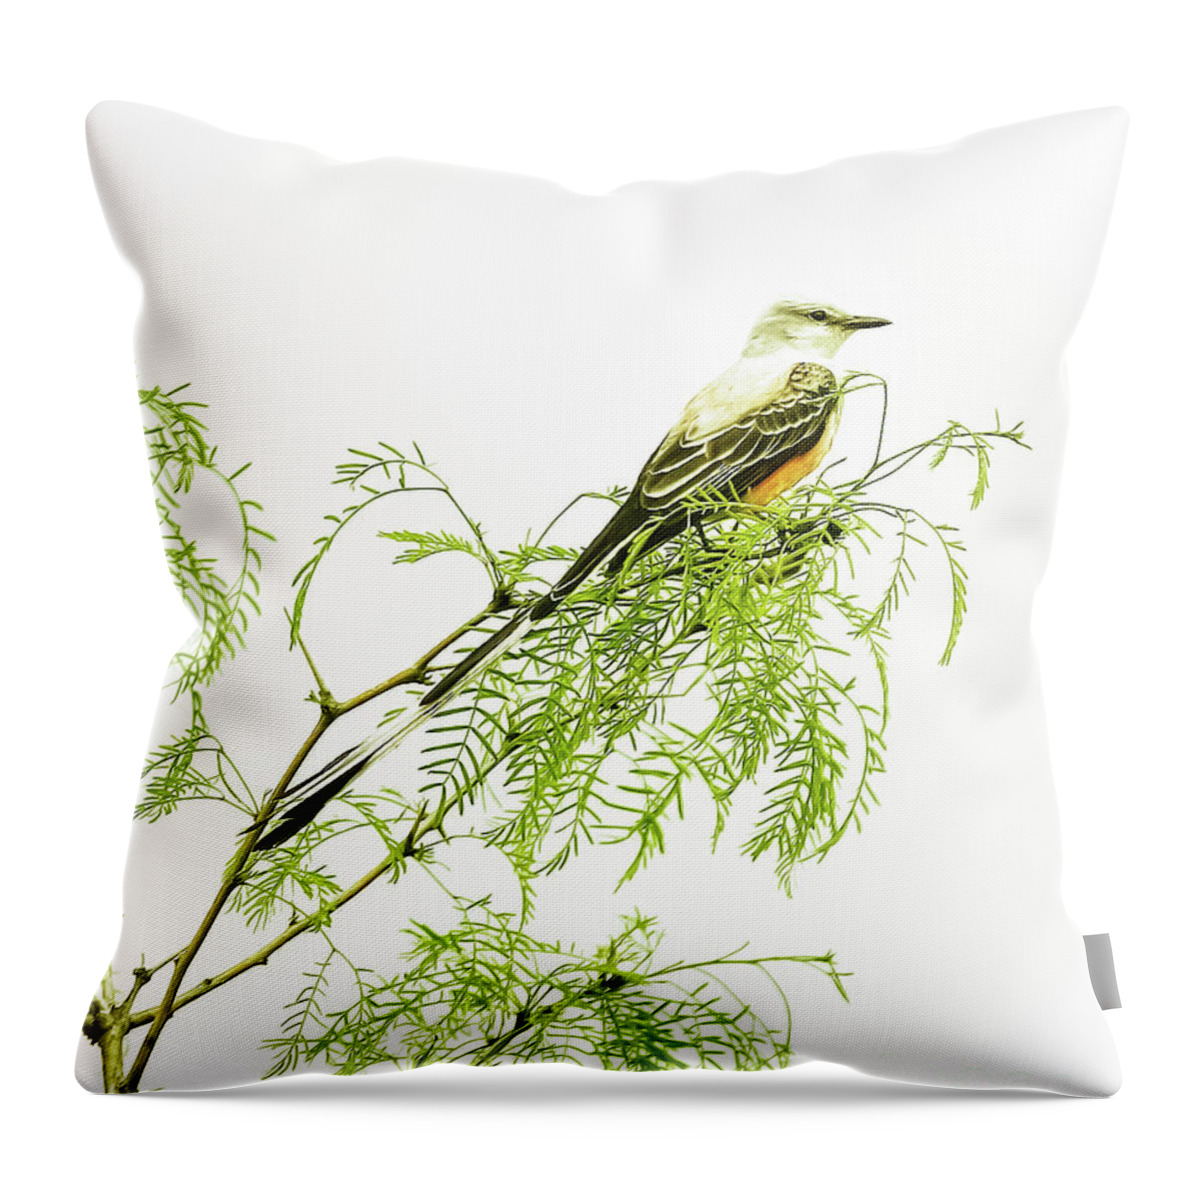 Animal Throw Pillow featuring the photograph Scissortail On Mesquite by Robert Frederick